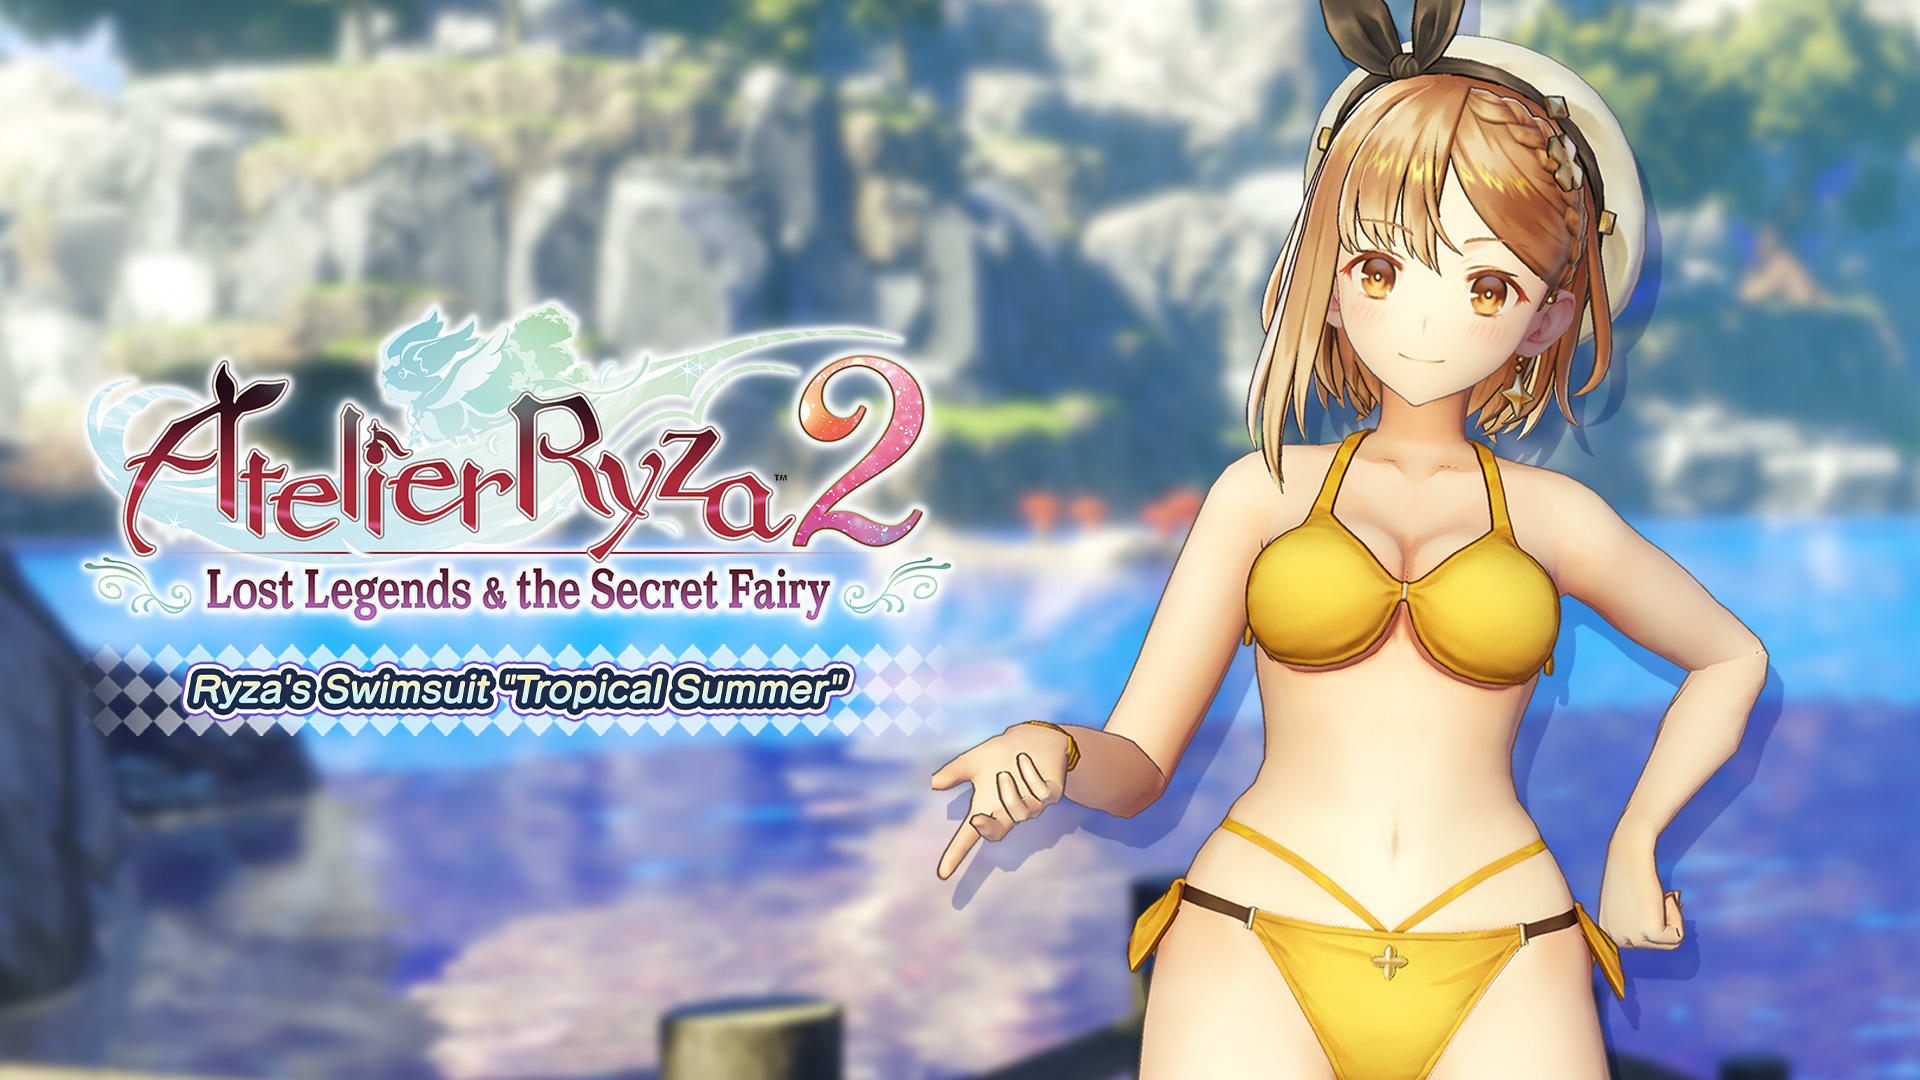 Ryza's Swimsuit "Tropical Summer" 1